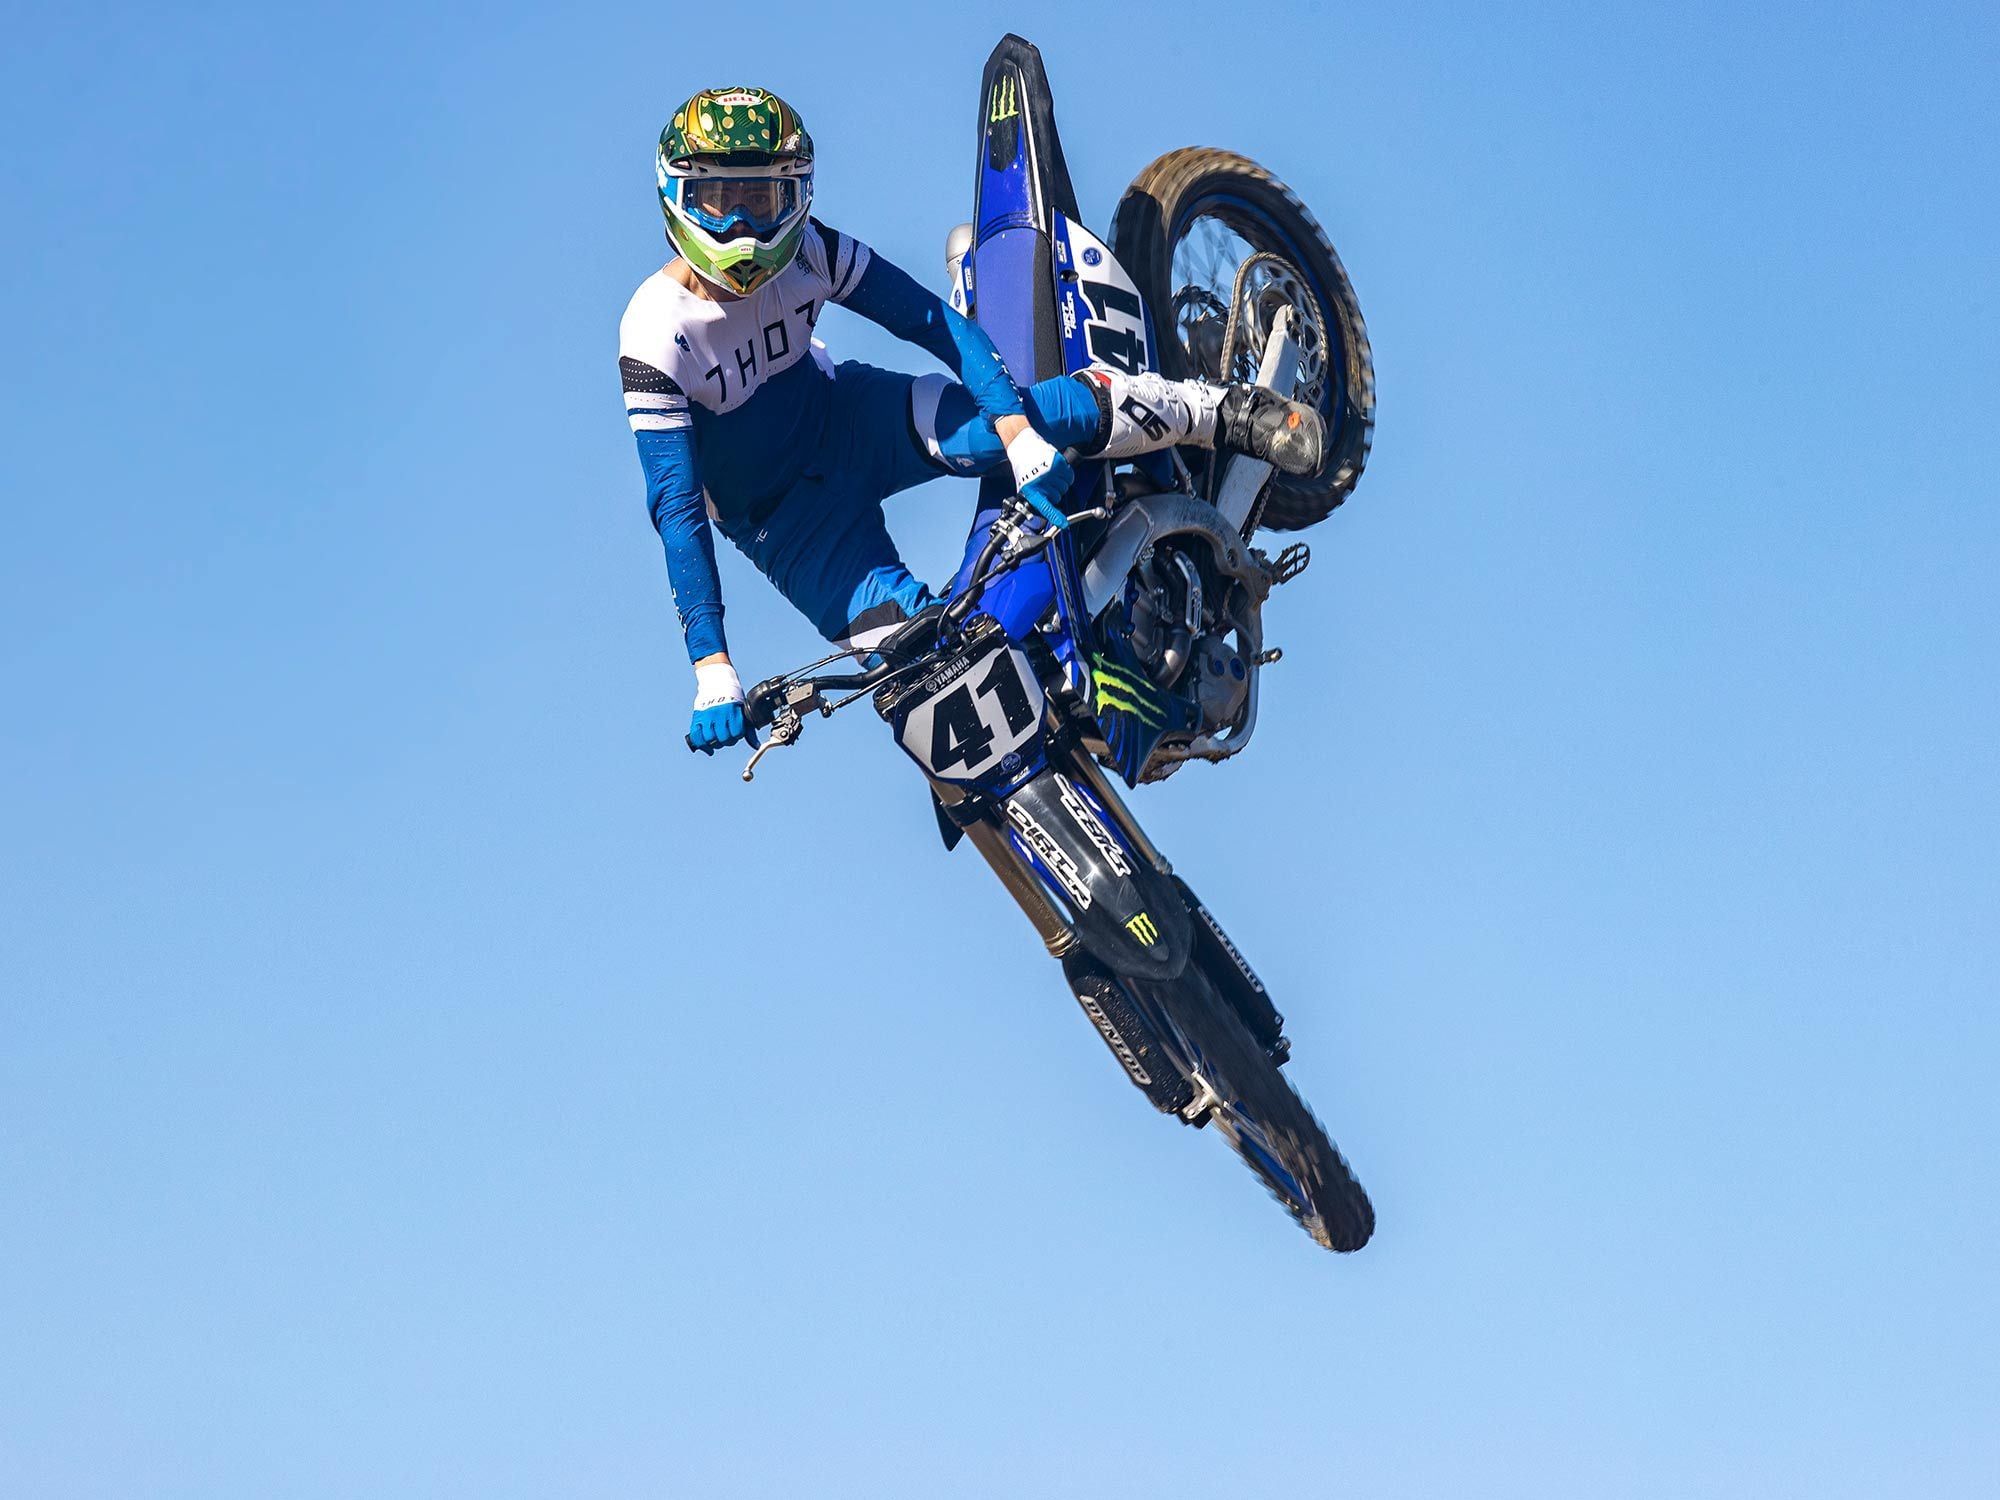 “This year’s YZ450F is an exciting new platform that longtime Yamaha owners will love. For those who haven’t loved Yamahas in the past, it’s finally a viable alternative.” <i>—Casey Casper</i>